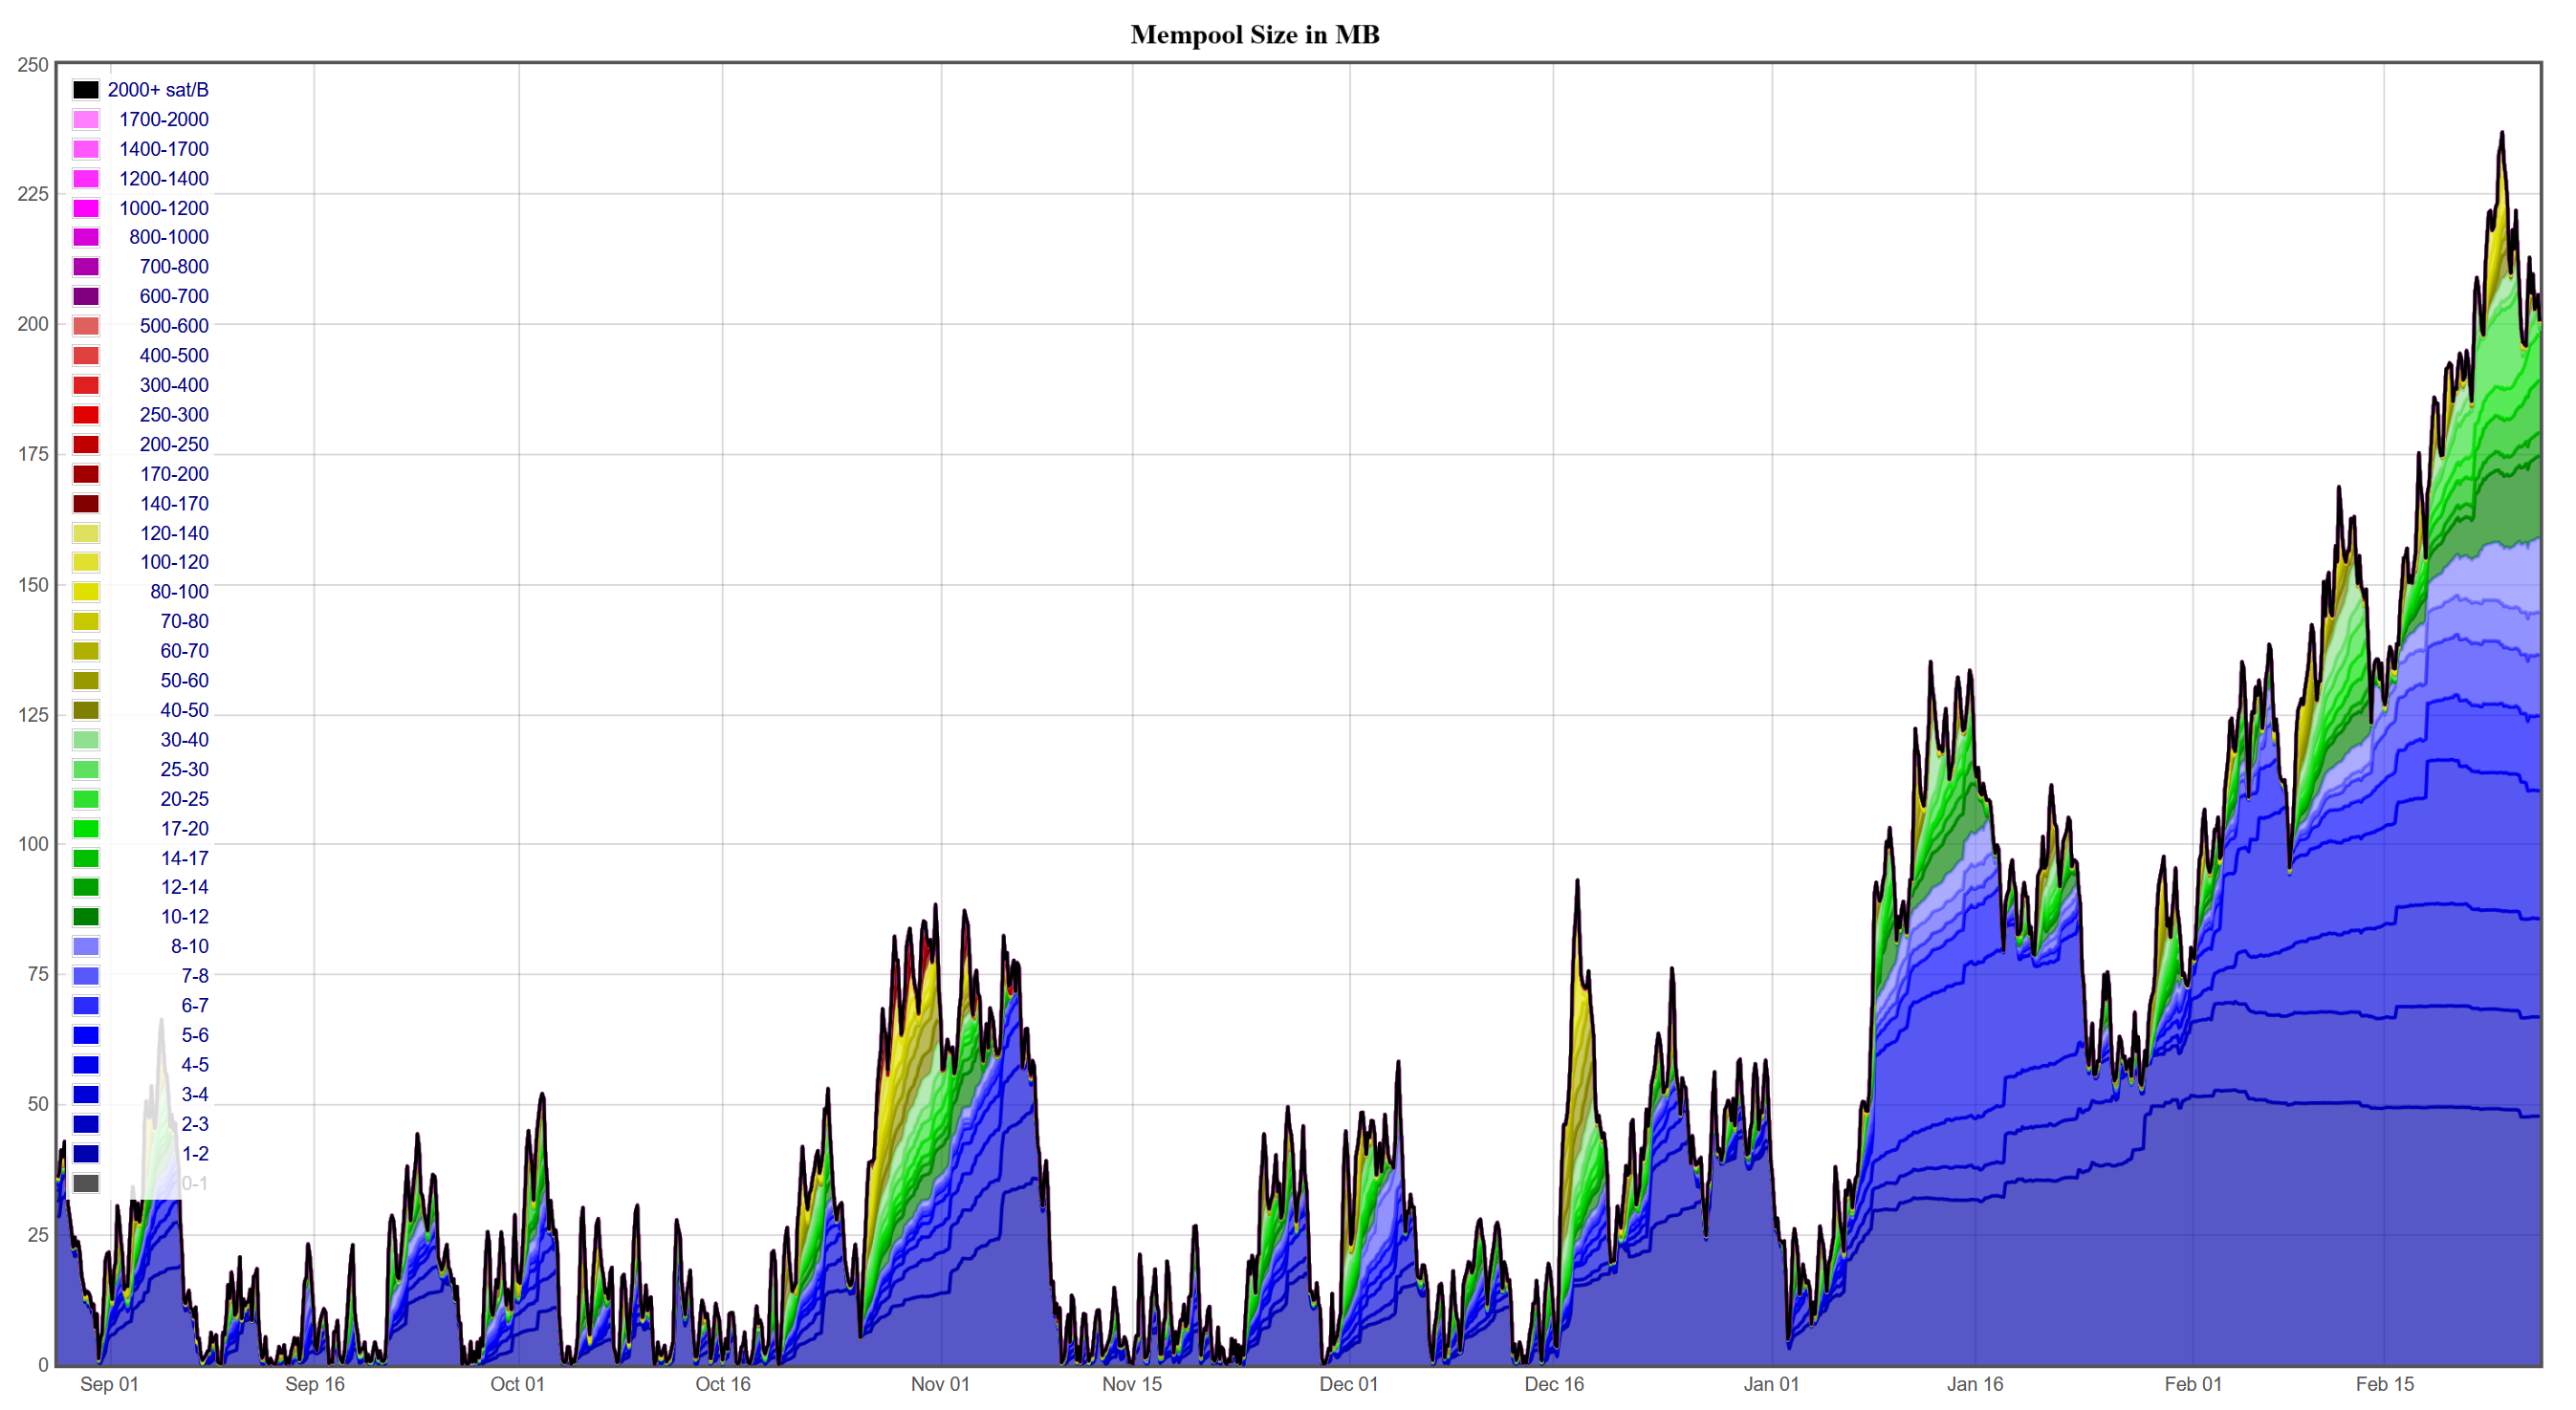 Bitcoin mempool fees forex adx indicator mt4 free